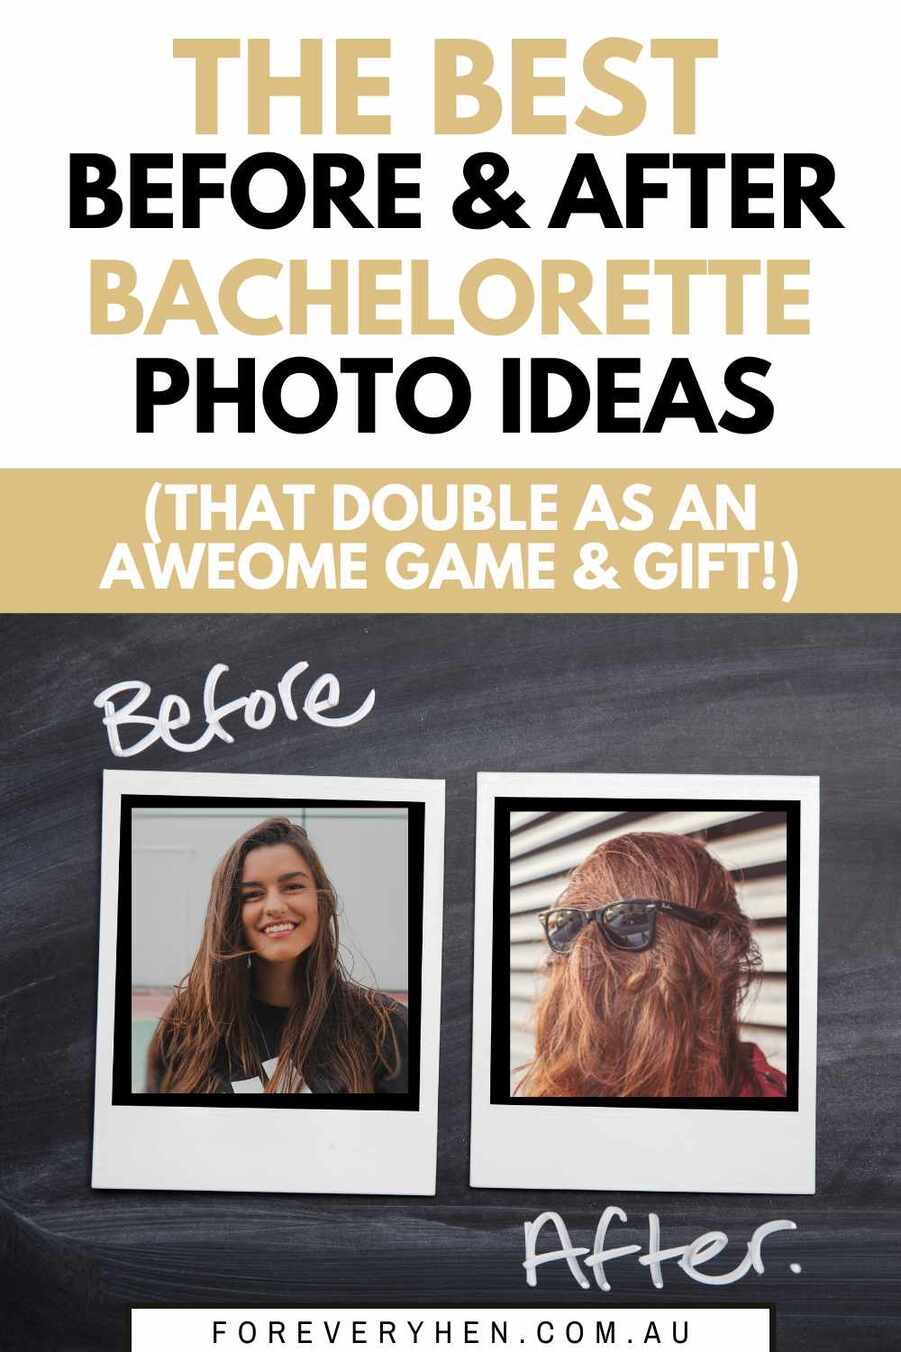 Before image of a woman smiling next to an 'after' image of a woman with her hair covering her face and wearing sunglasses over the top. Text overlay: the best before & after bachelorette photo ideas (that double as an awesome gift!)